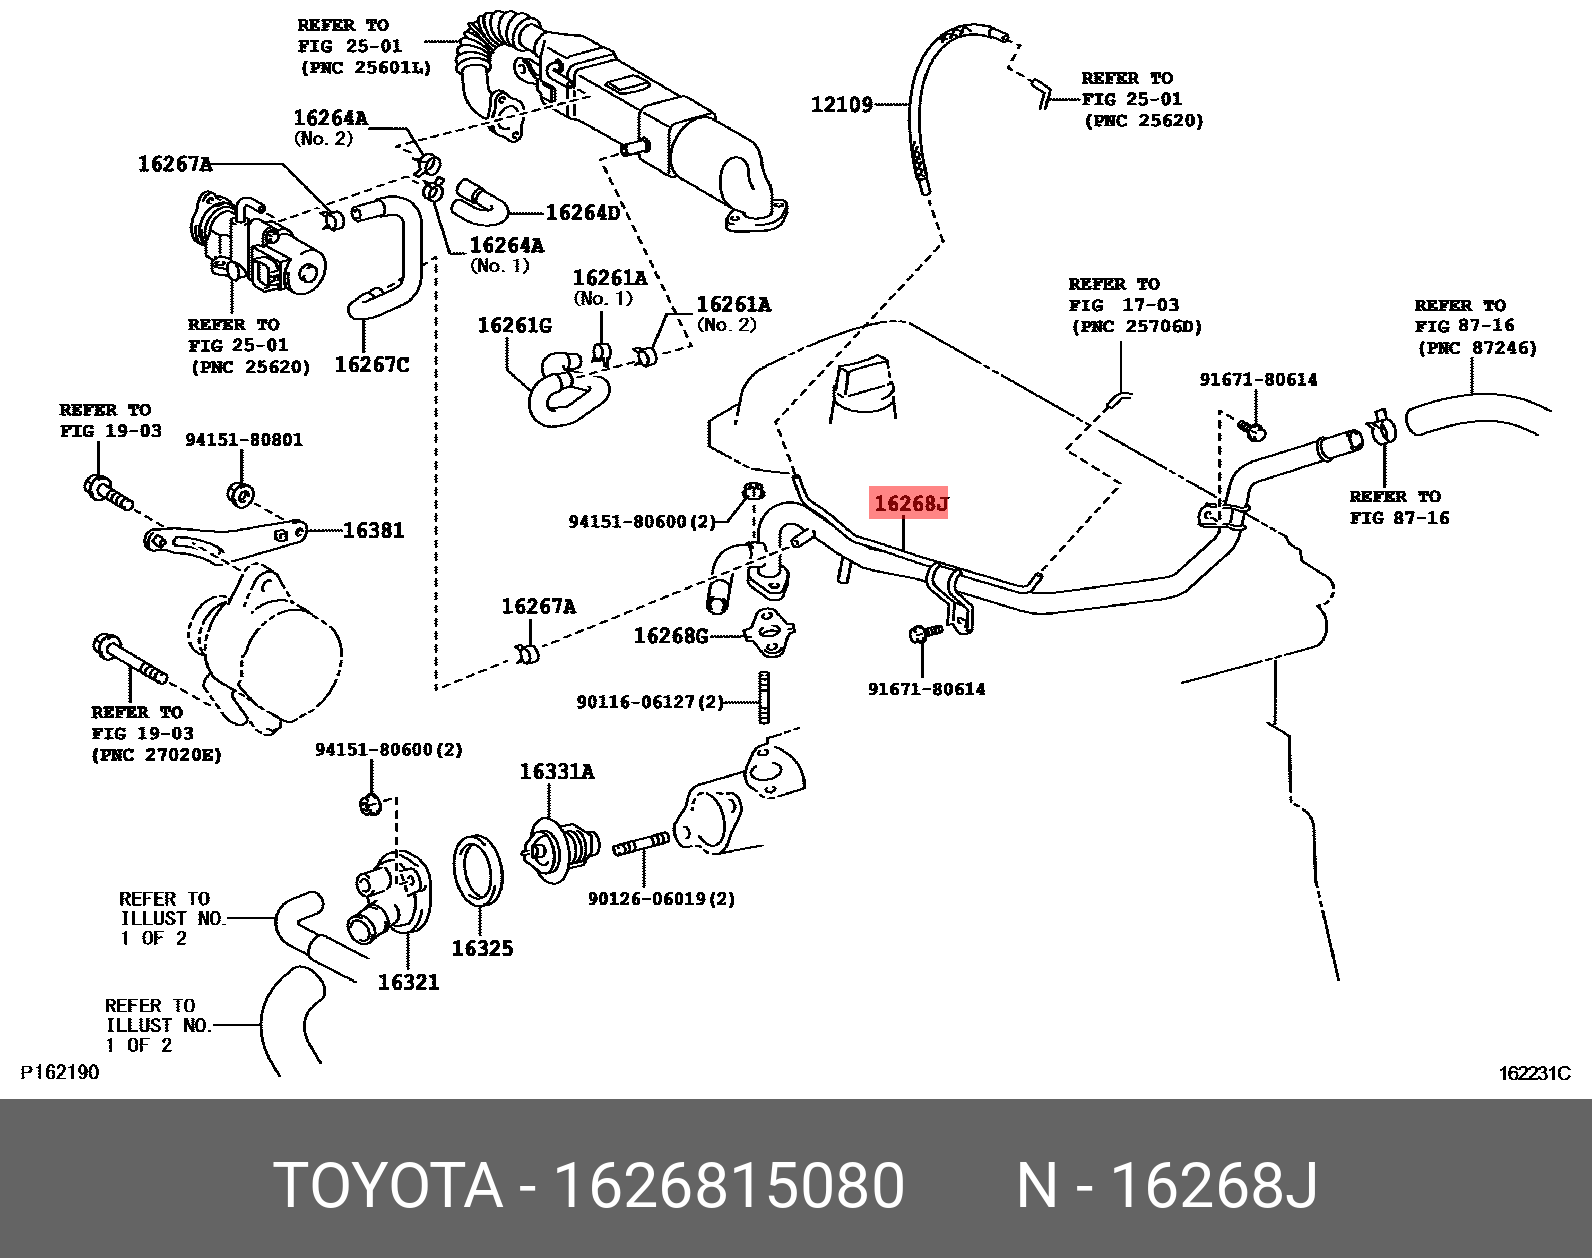 COROLLA LEVIN 198705 - 199106, PIPE, WATER BY-PASS, NO.5